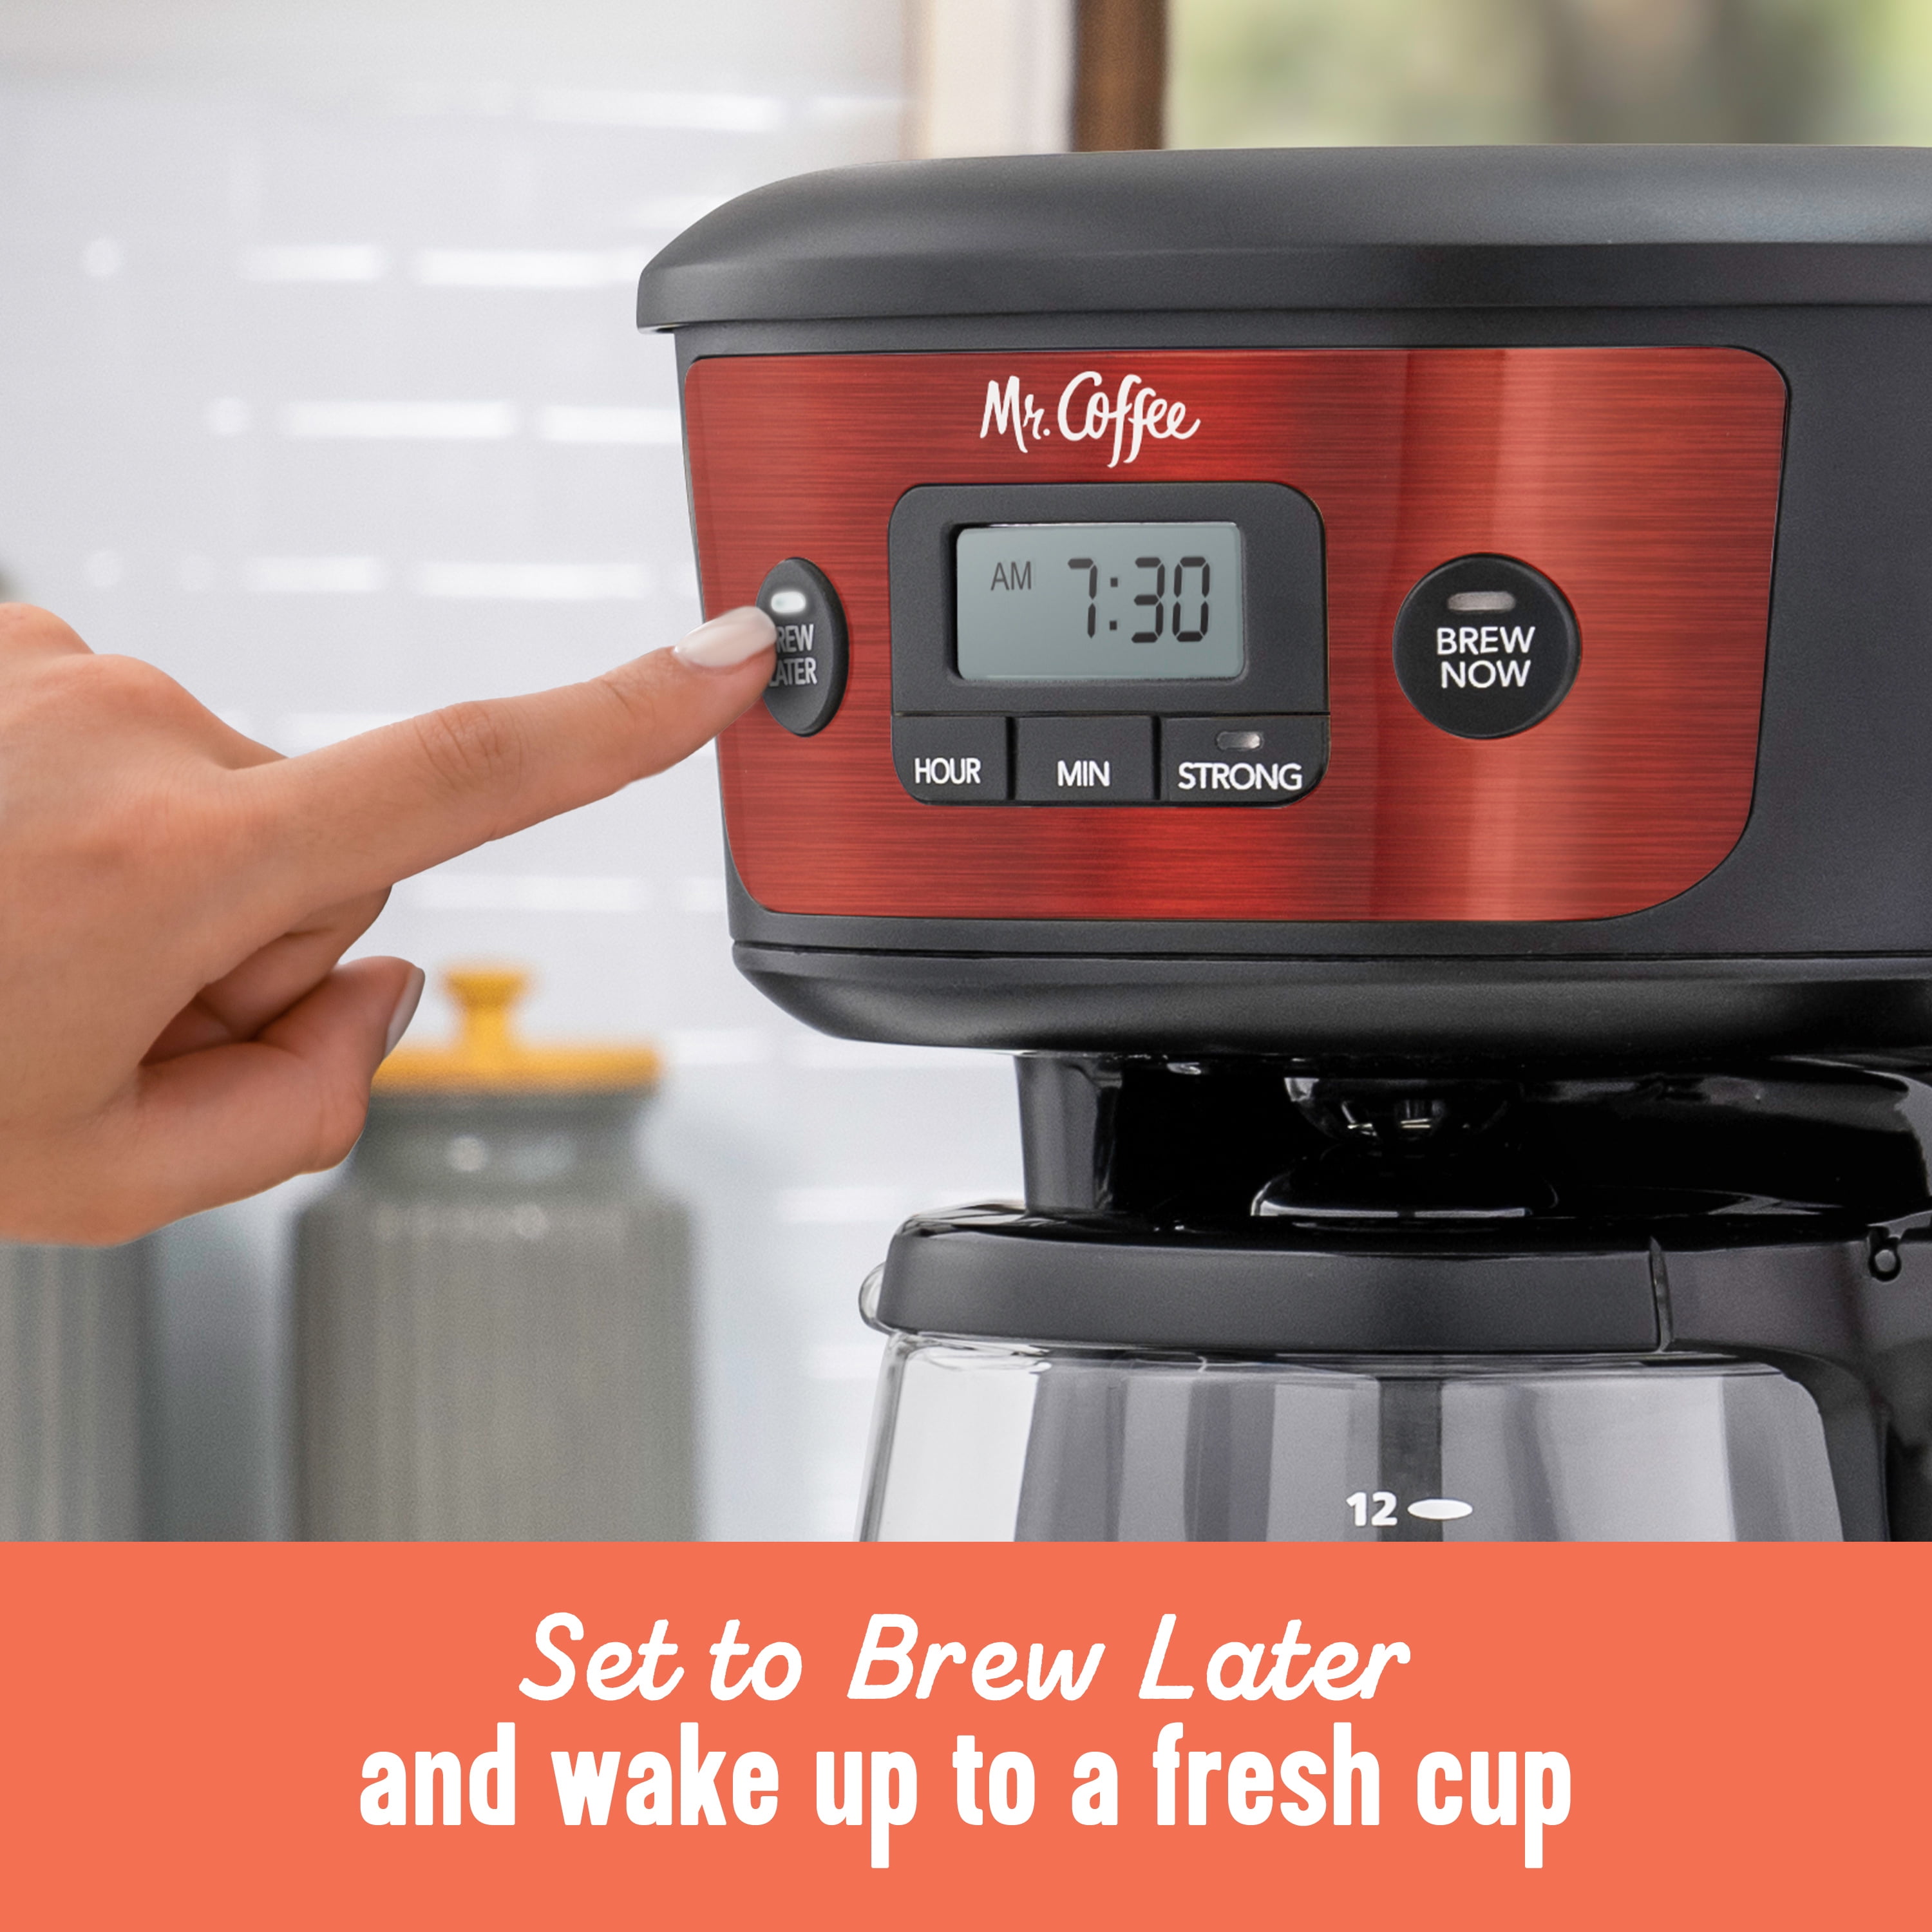 12 Cup Programmable Coffee Maker, Red - 43253R